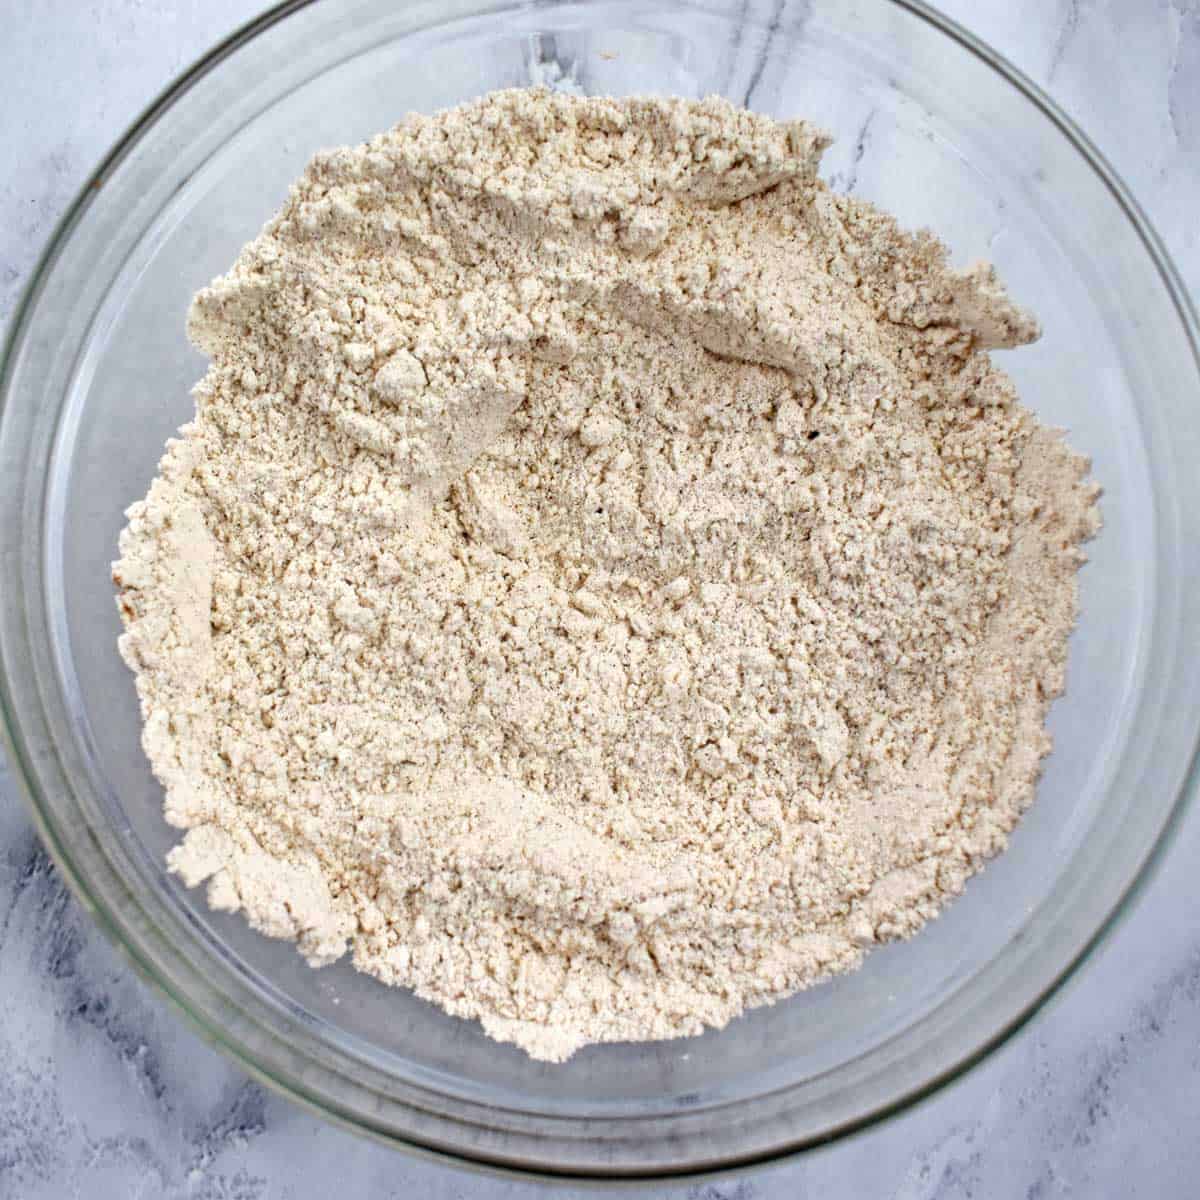 Gluten free flour, baking soda, salt, and spices whisked together in glass mixing bowl.